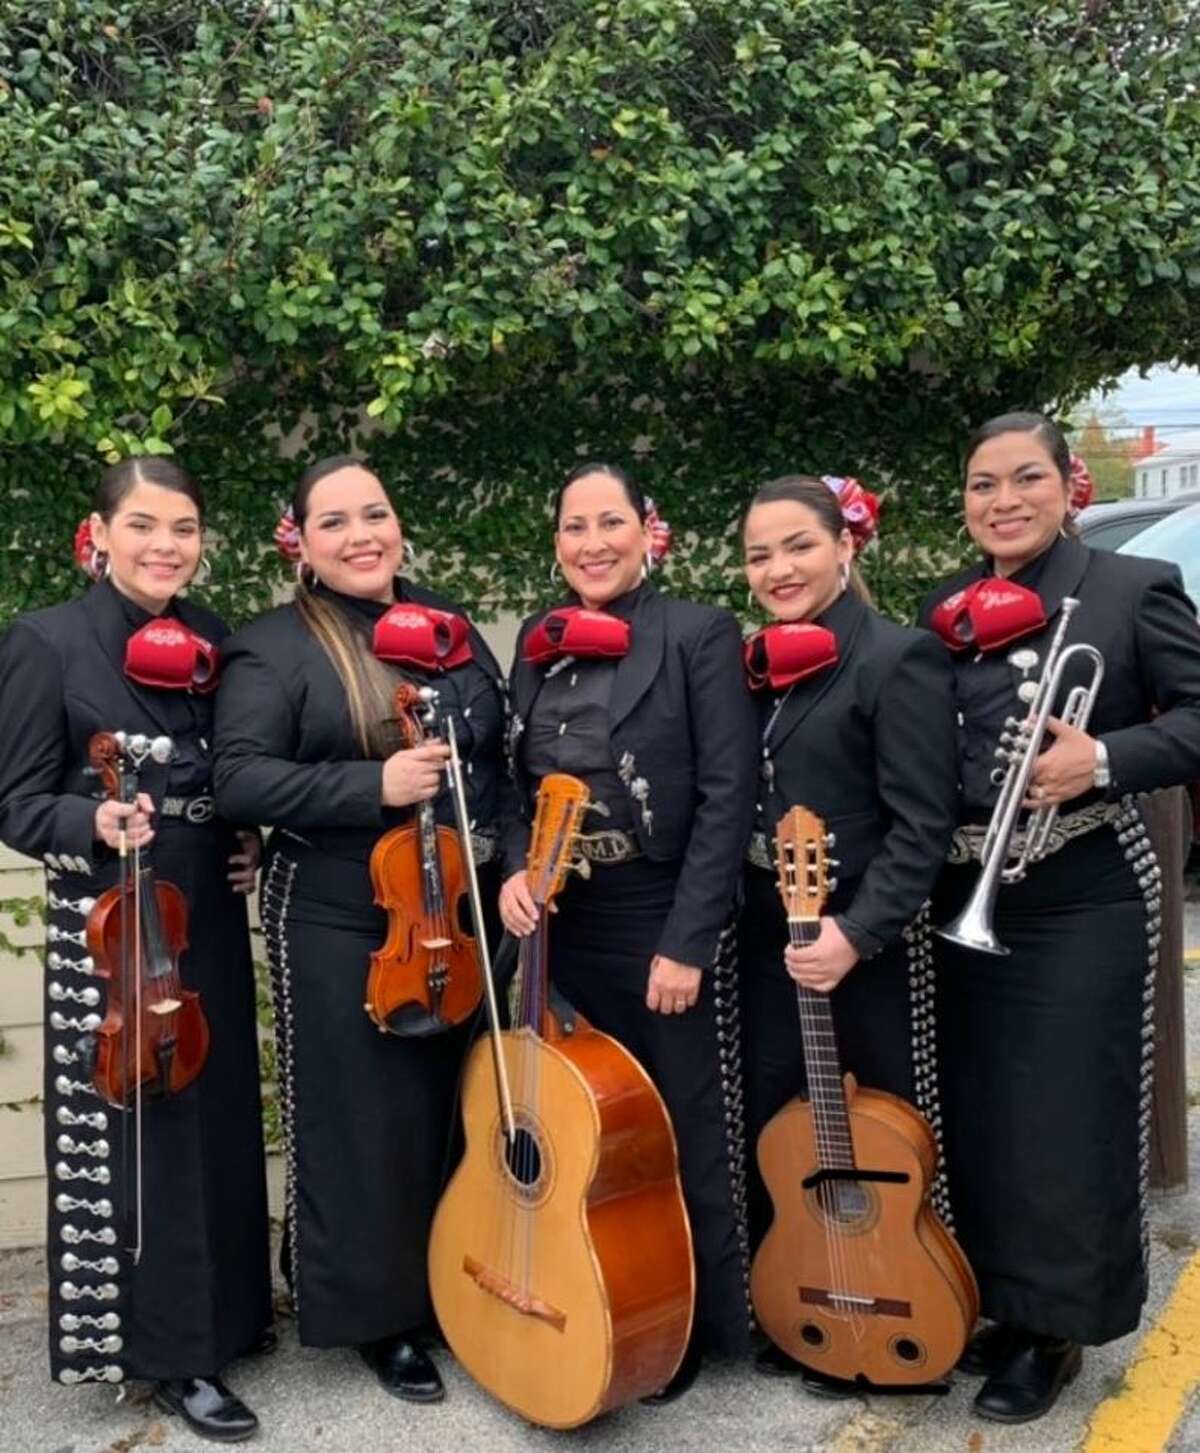 These Texas all-female mariachi groups are breaking down stereotypes